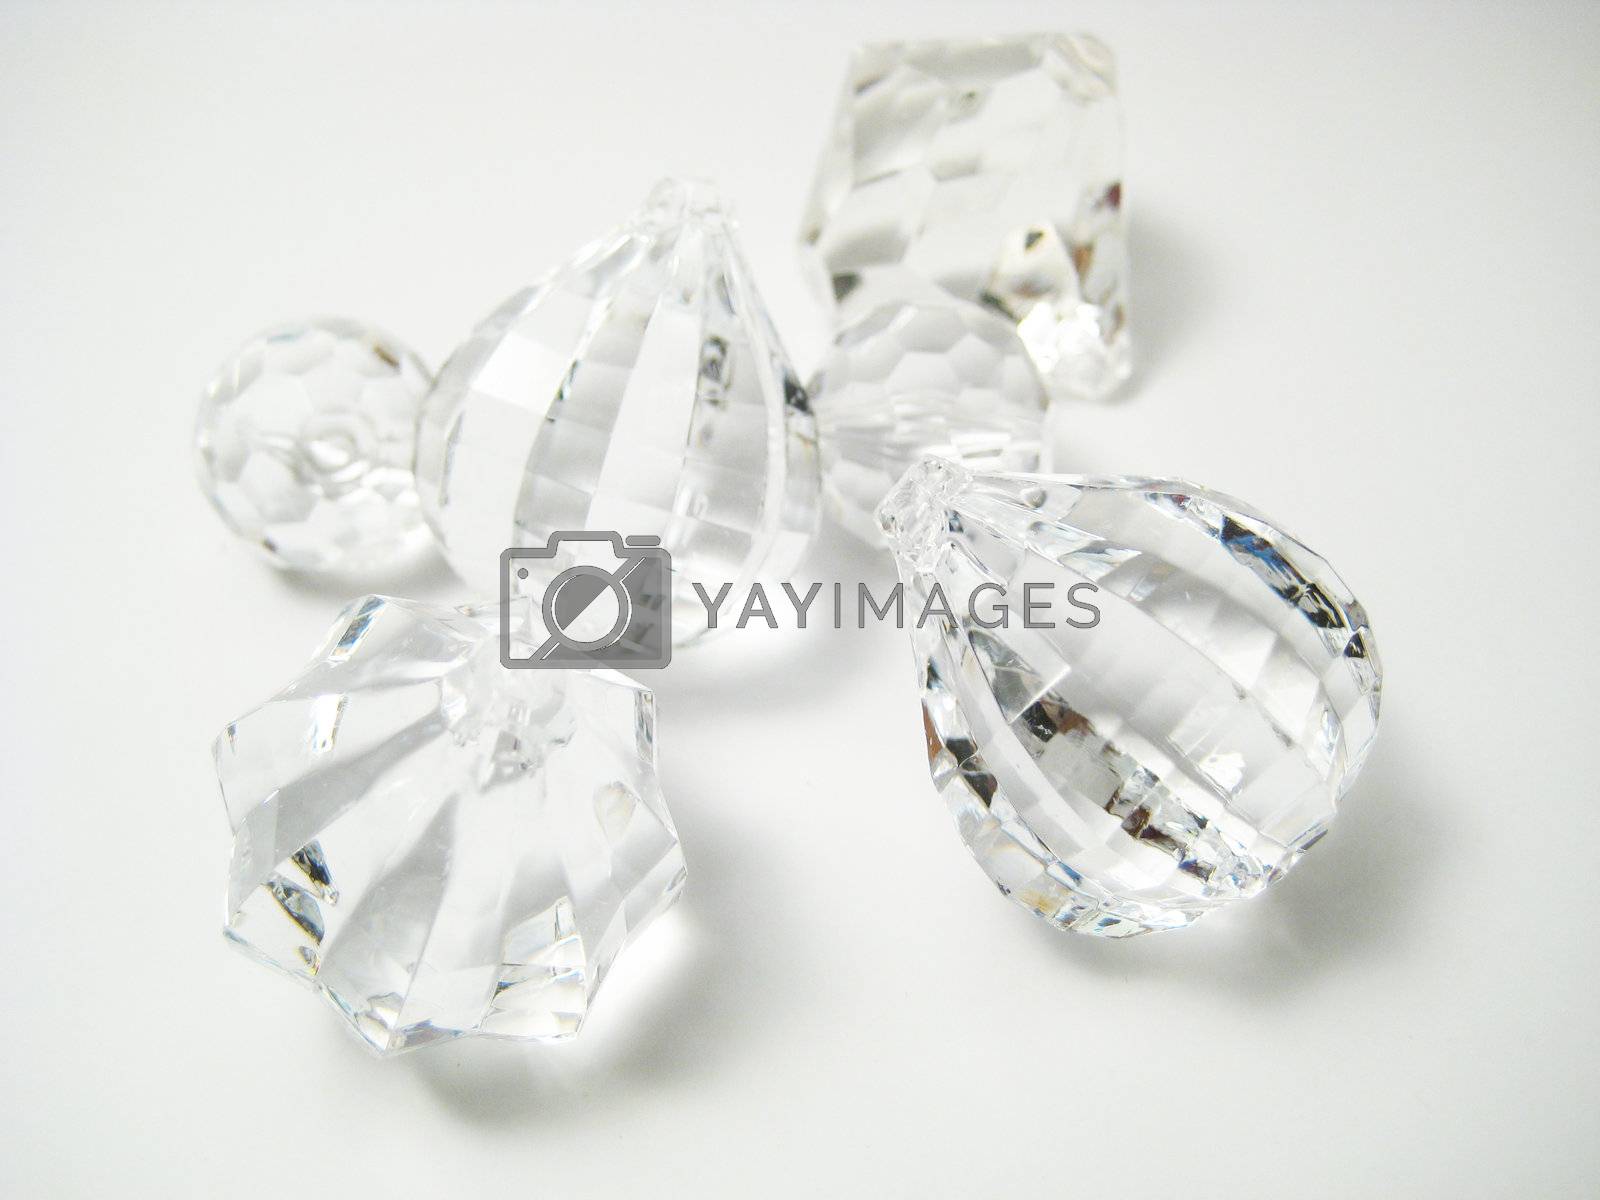 Royalty free image of Crystals by jclardy